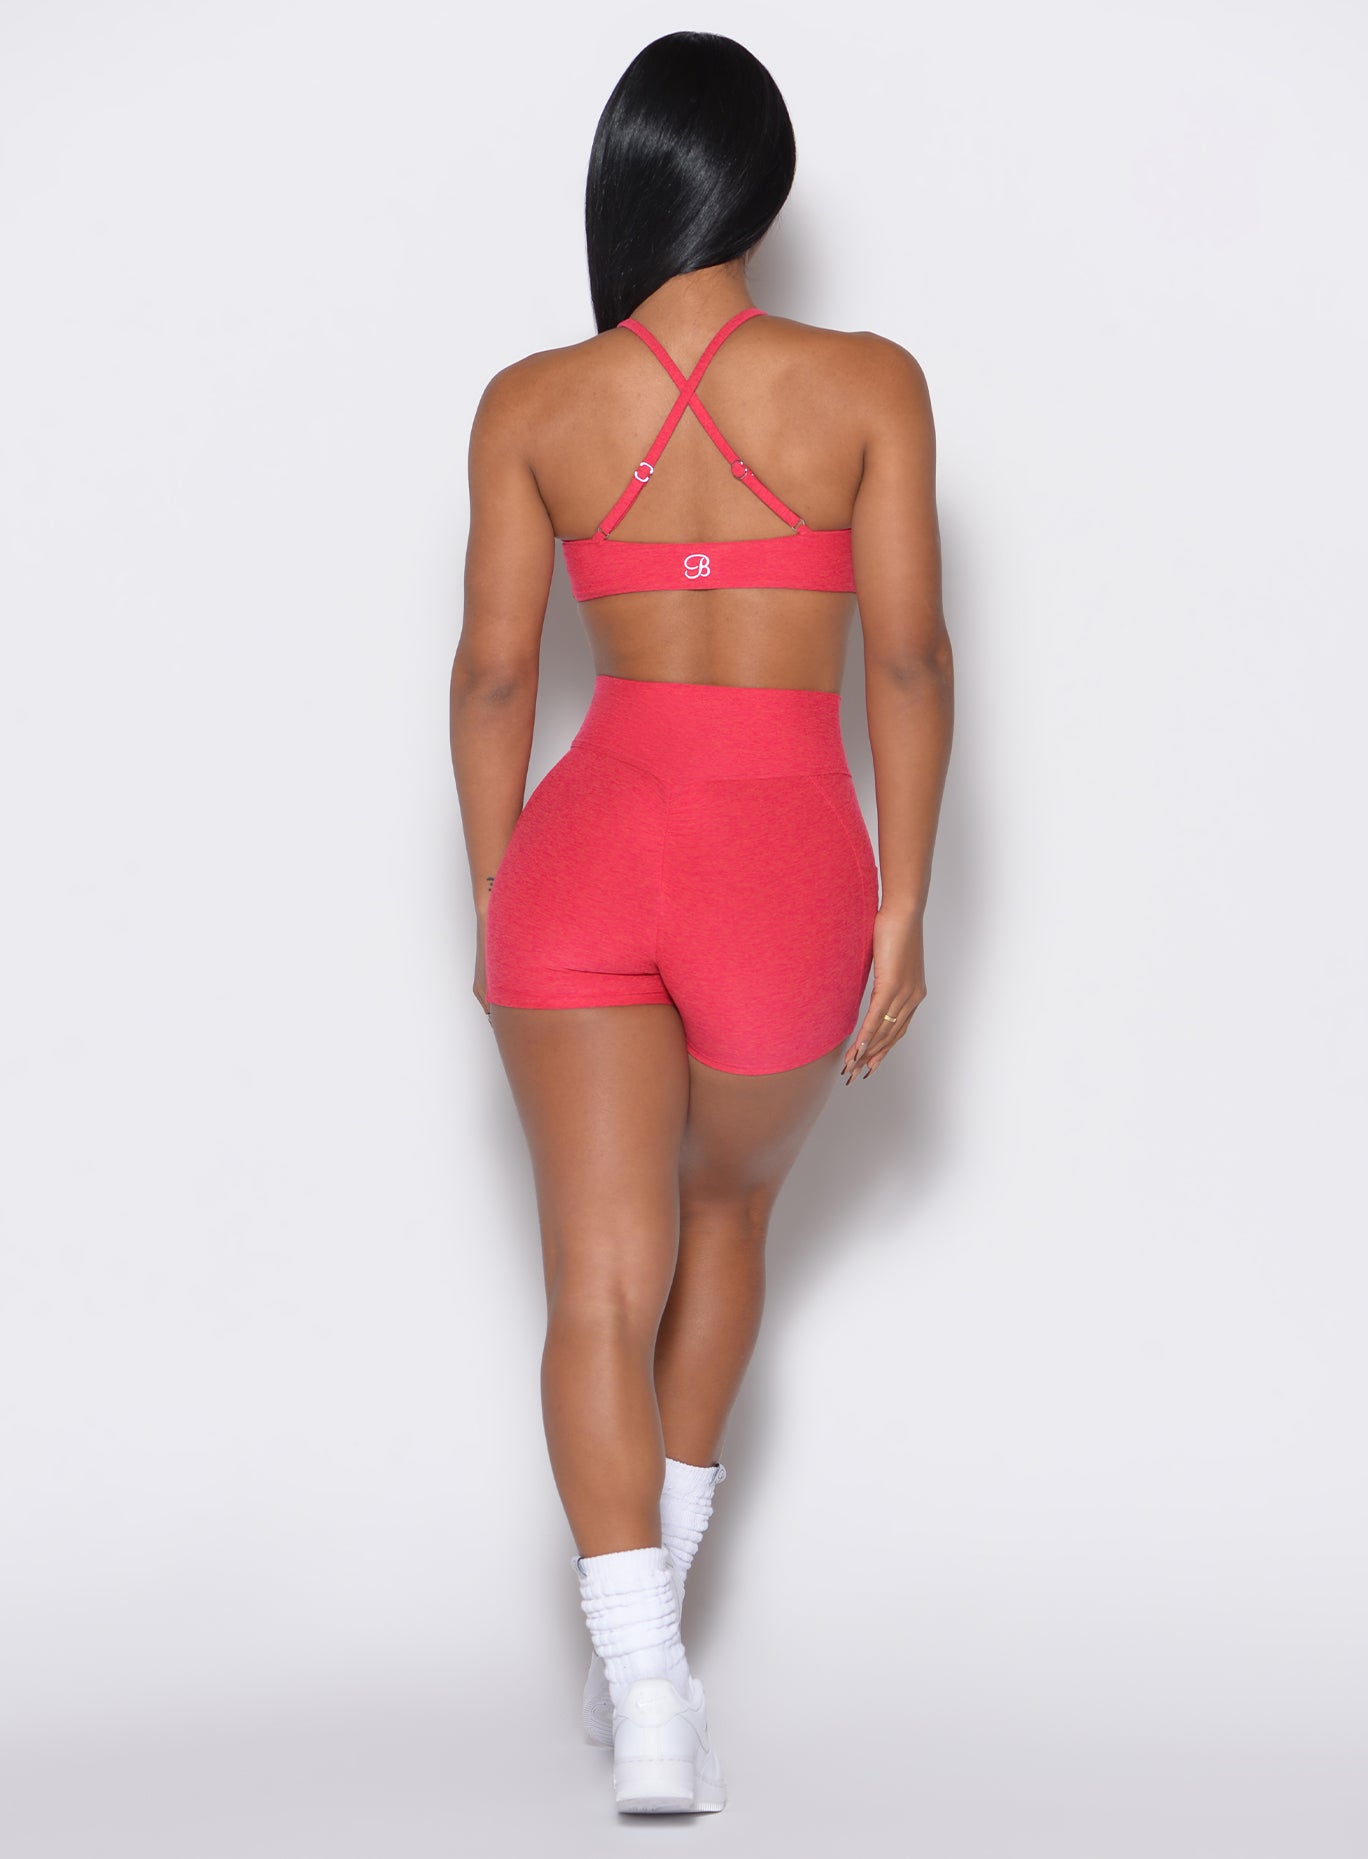 back  profile view of a model wearing our scrunch shorts in Raspberry Punch color along with a matching bra